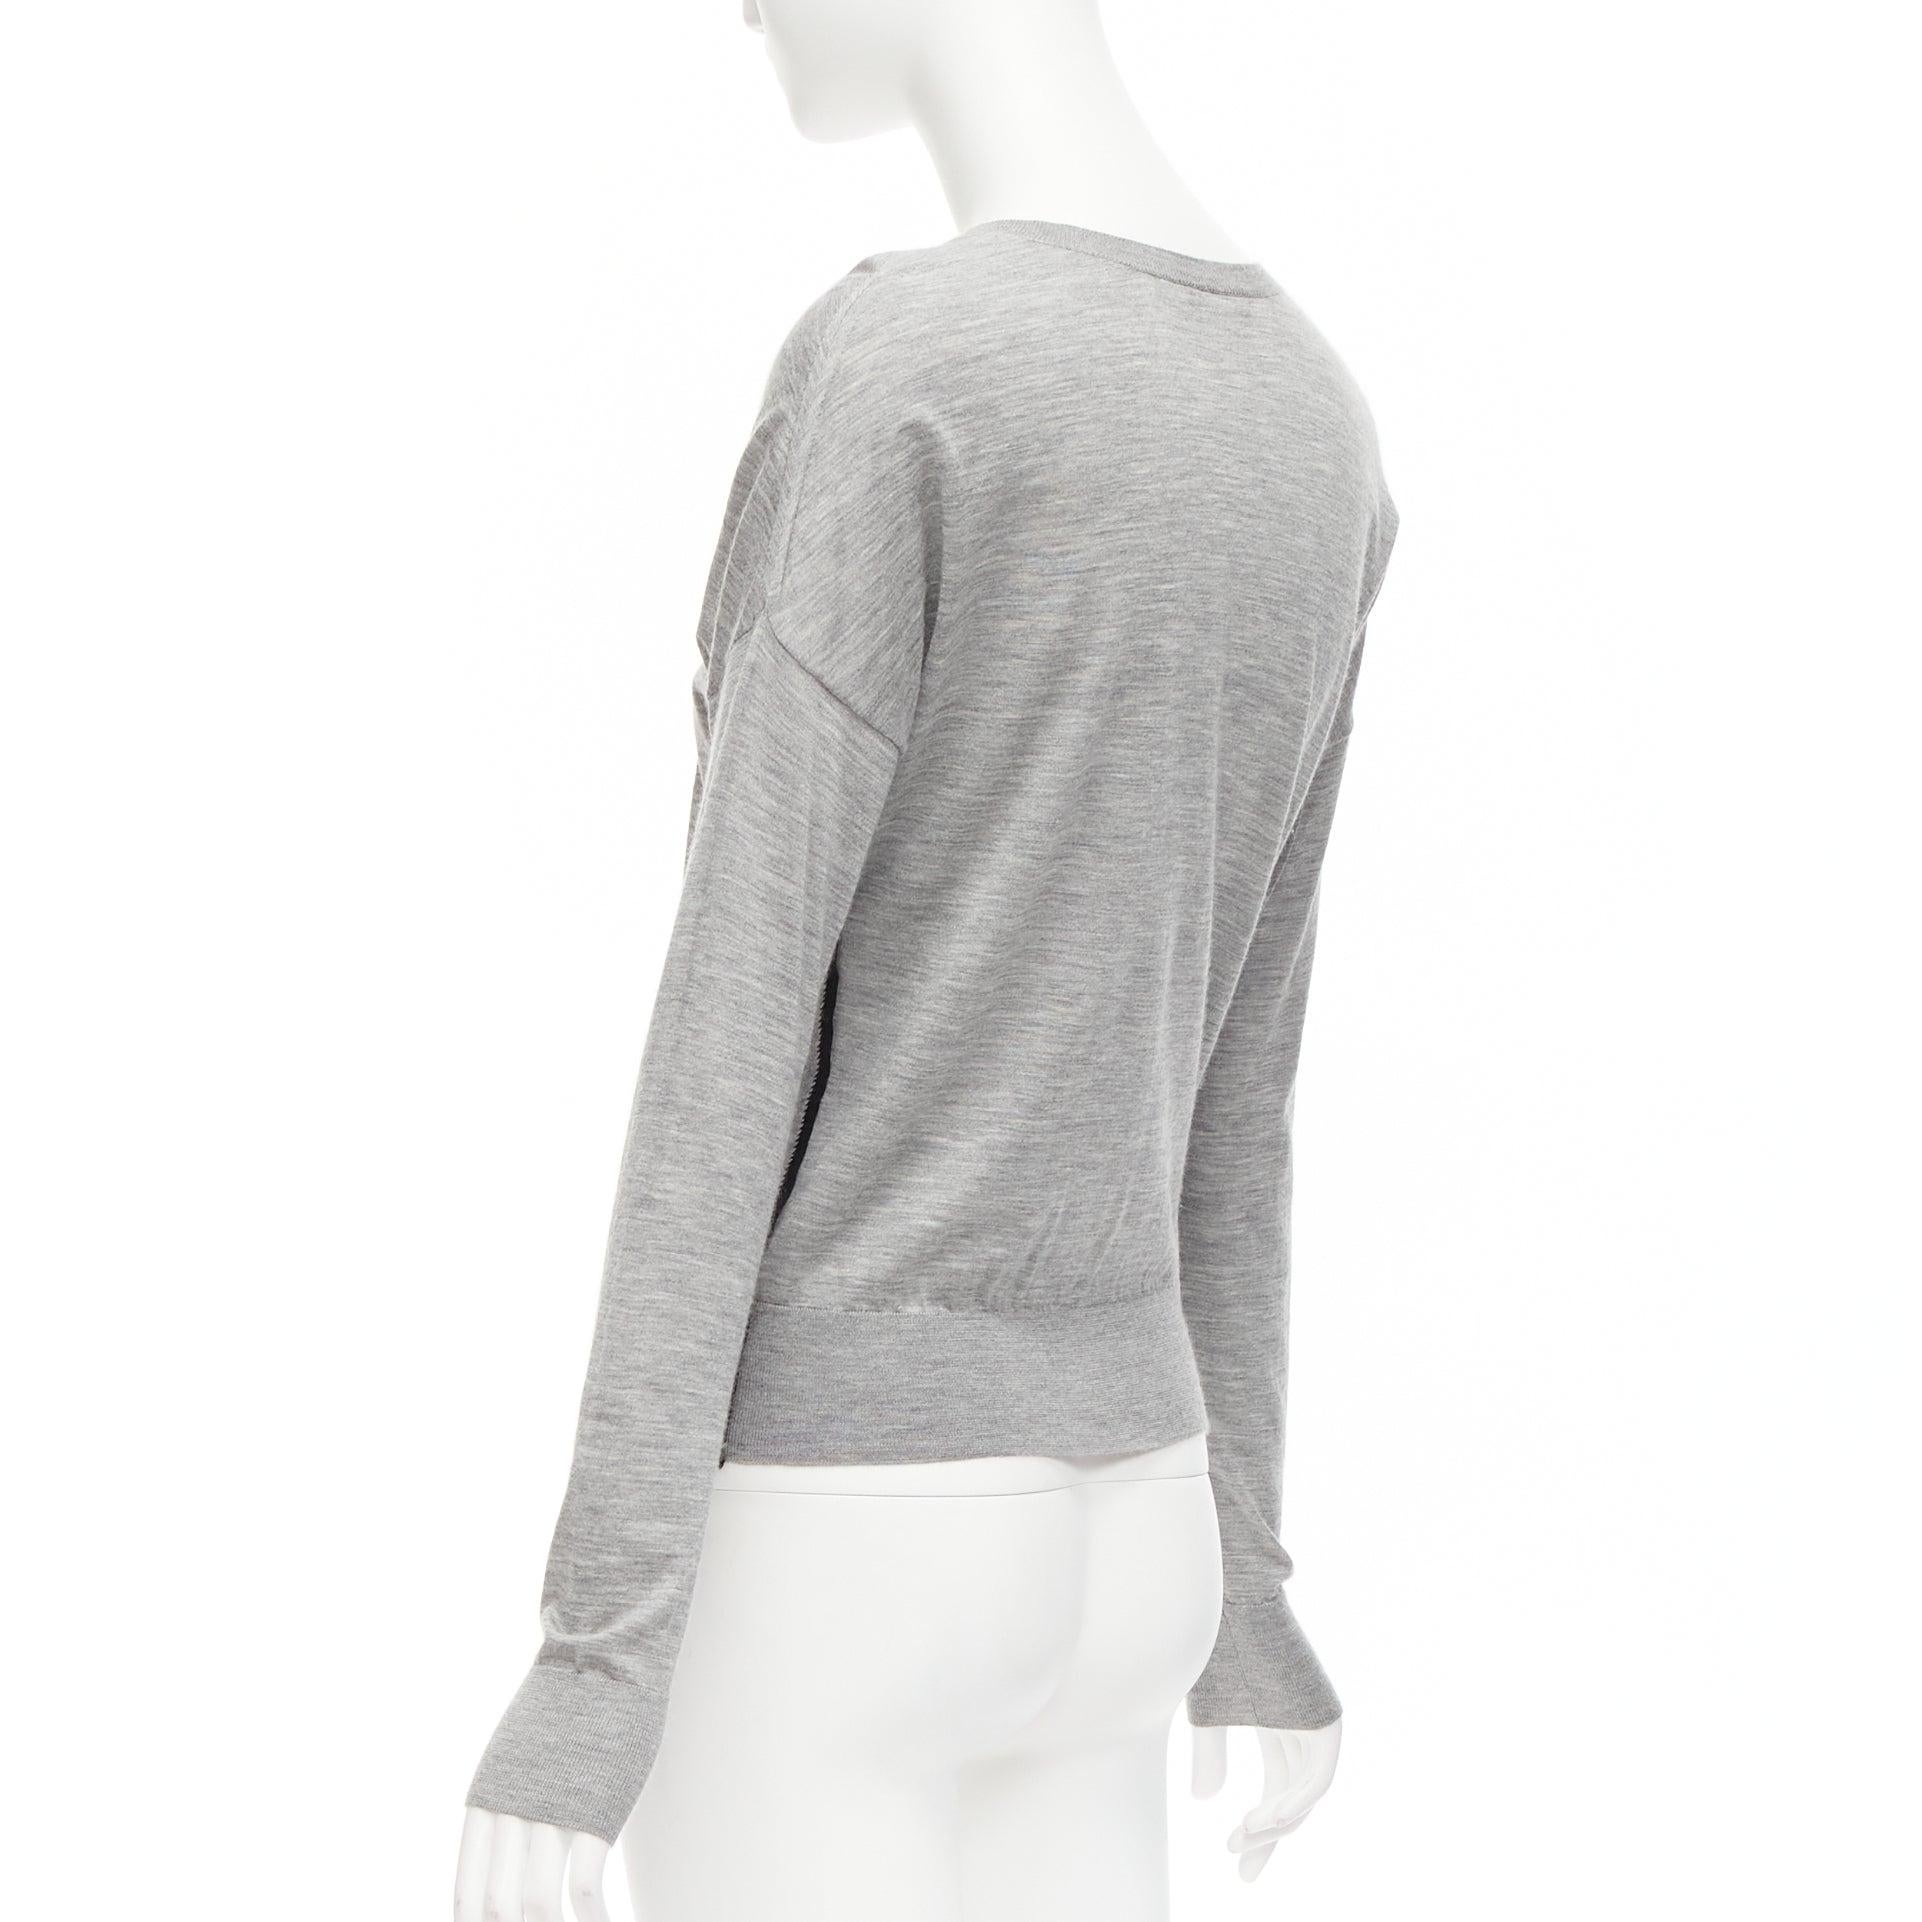 LOUIS VUITTON grey soft knit black beaded LV logo V neck pullover top For Sale 2